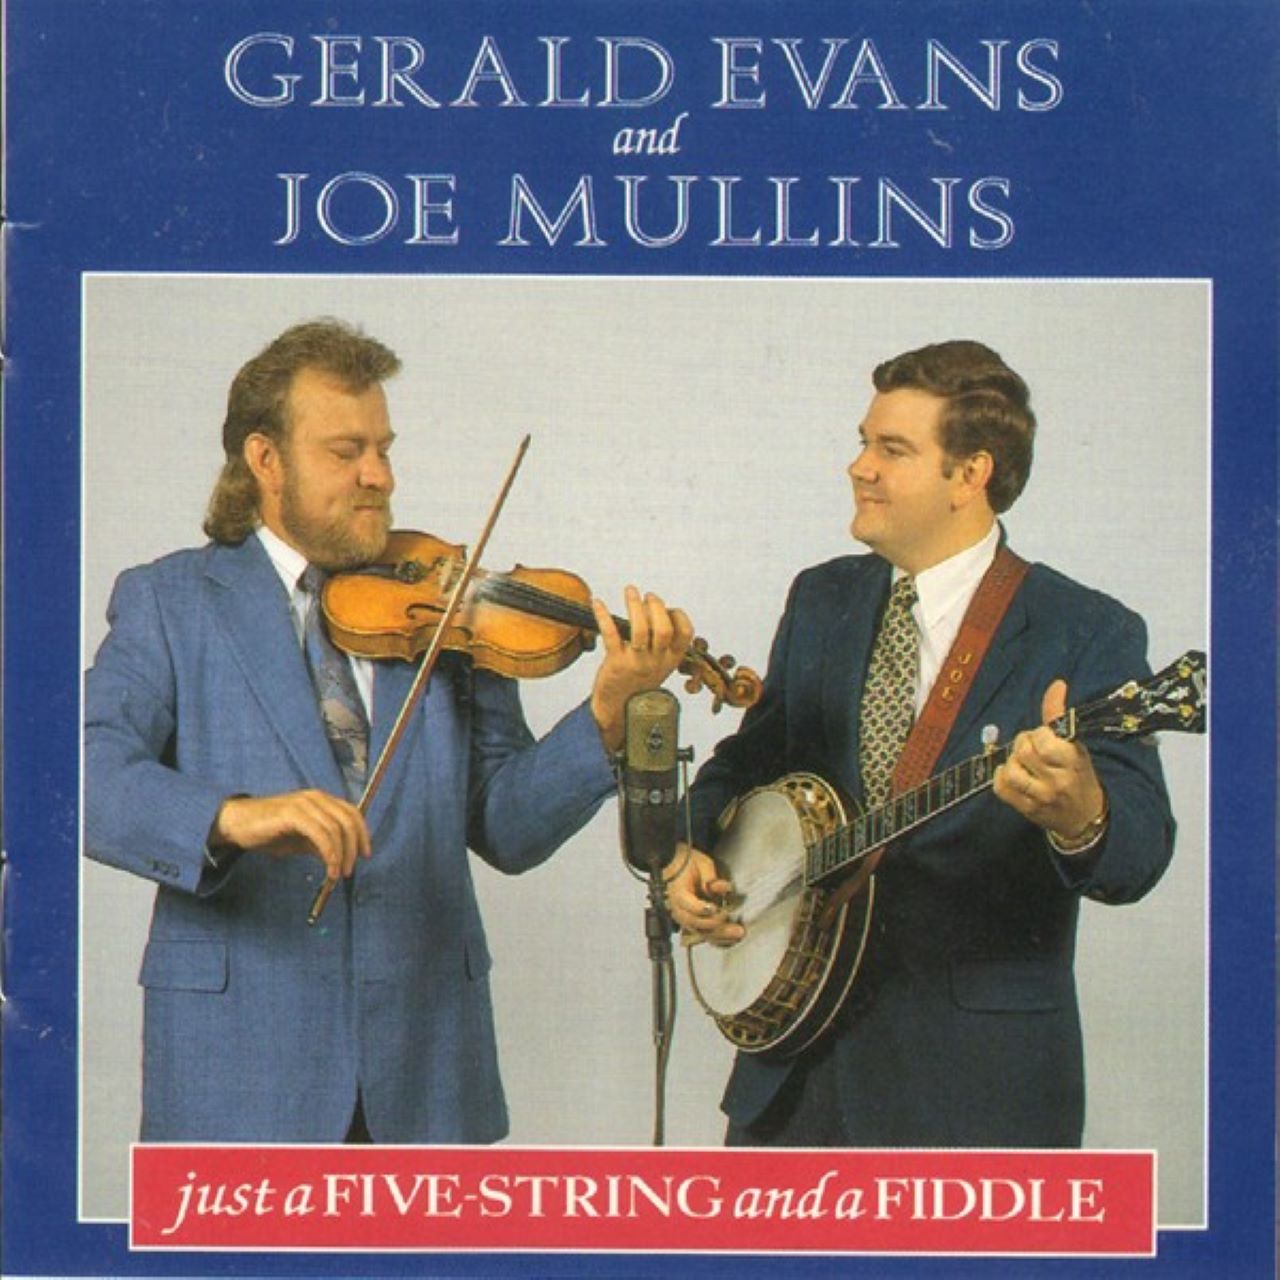 Gerald Evans & Joe Mullins - Just A Five String And A Fiddle cover album